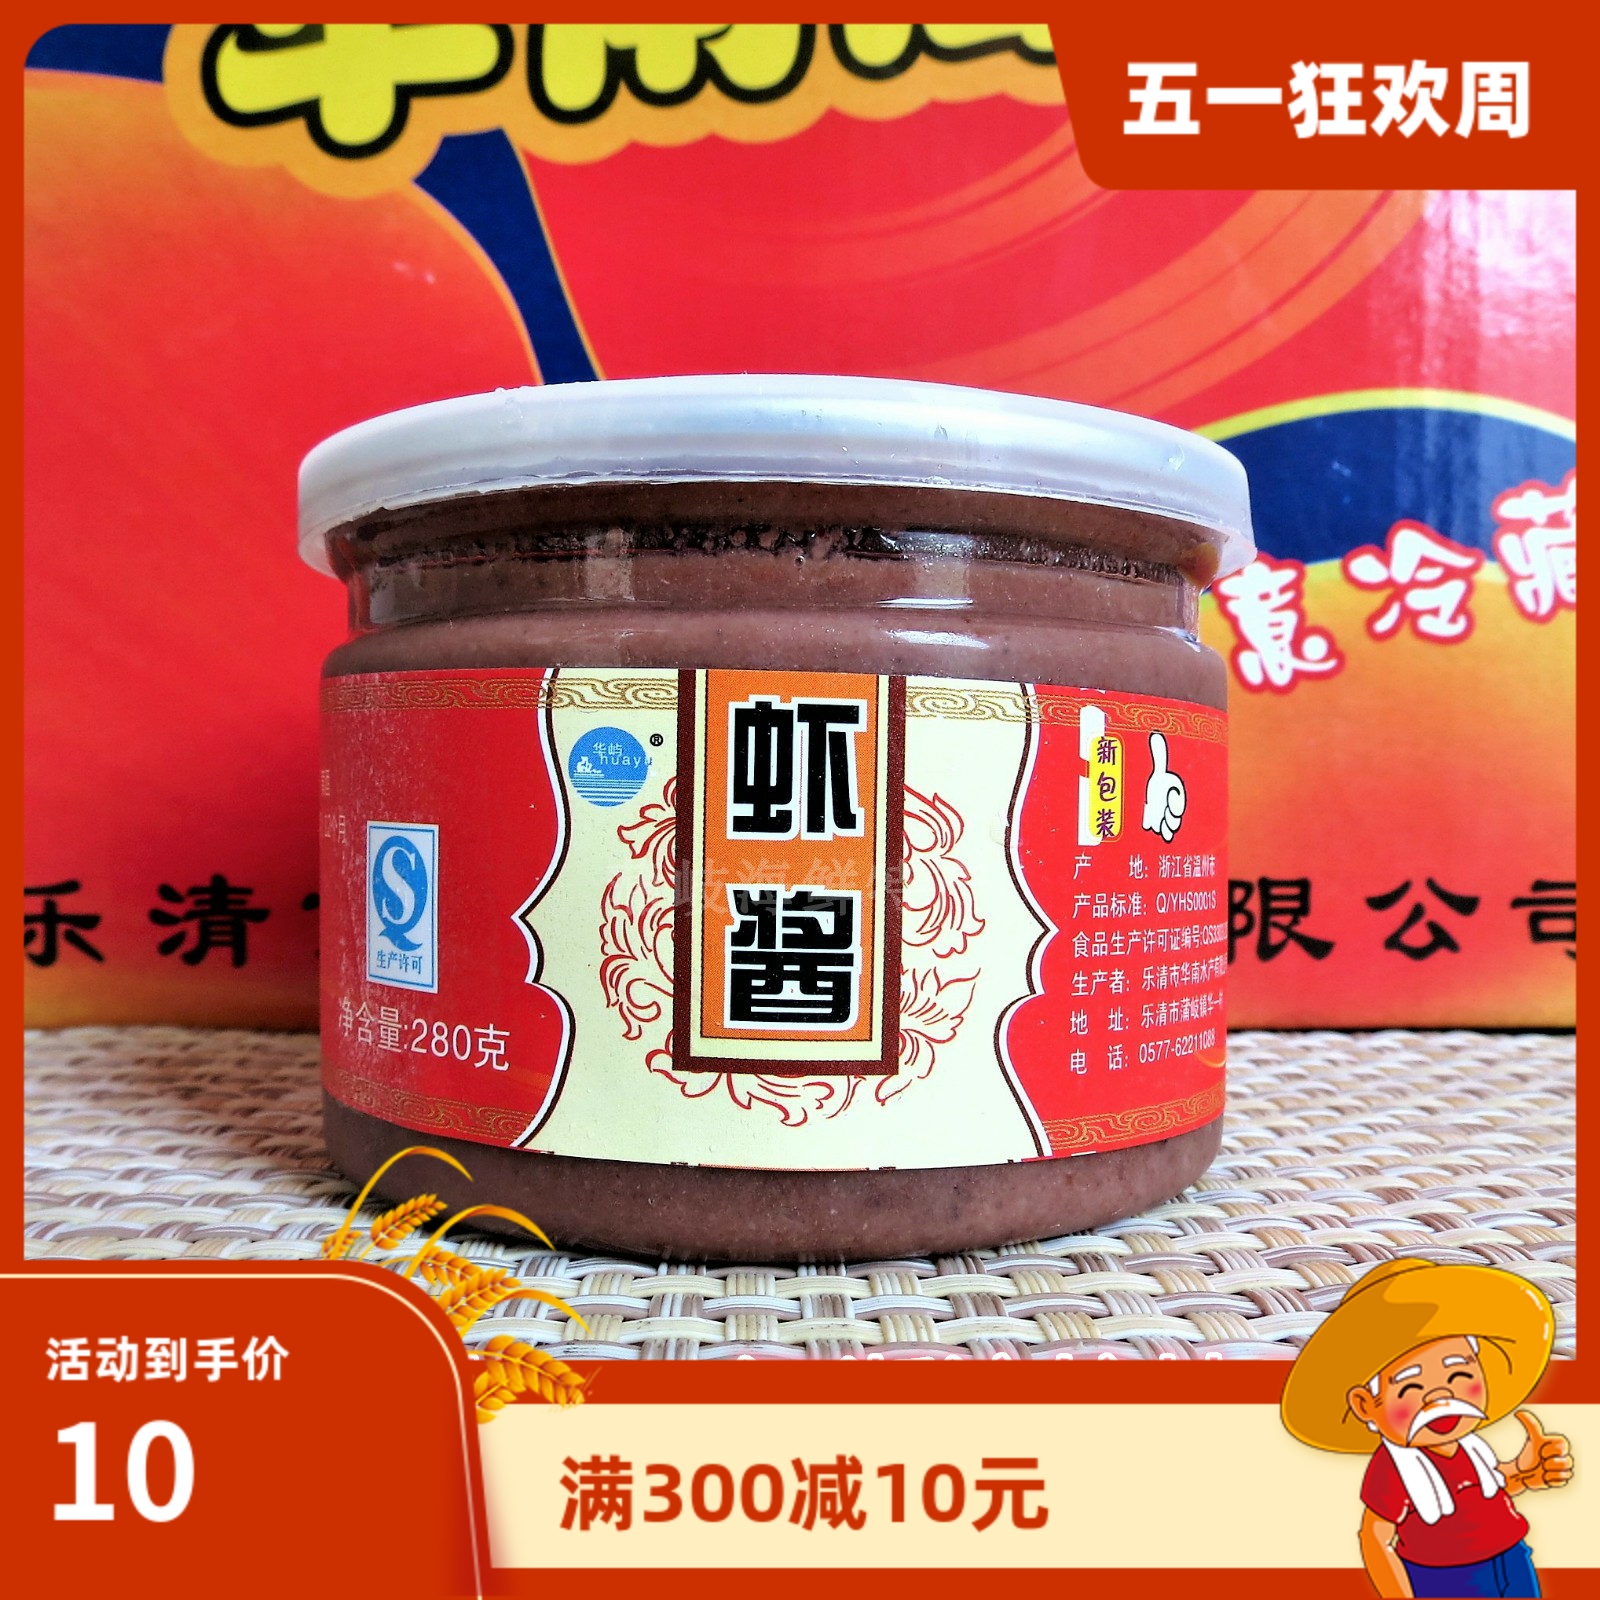 Wenzhou Leqing Phut Property South China Aquatic South China Shrimp Paste Cured Seafood Steamed Meat with Aromatic Shrimp Paste 280 gr